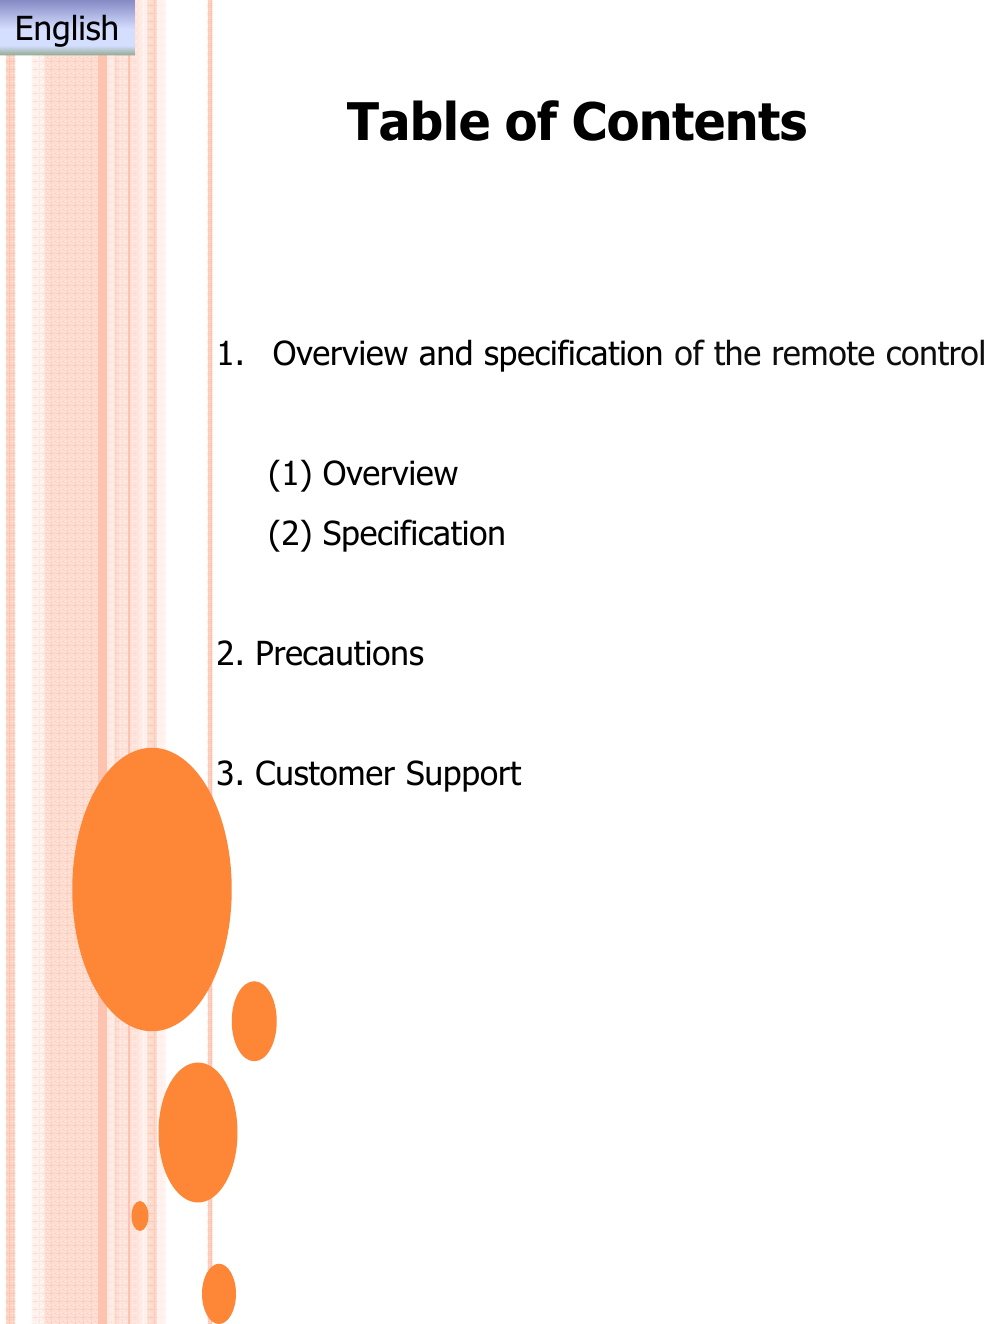 Table of Contents1. Overview and specification of the remote control(1) Overview(2) Specification2. Precautions3. Customer SupportEnglish